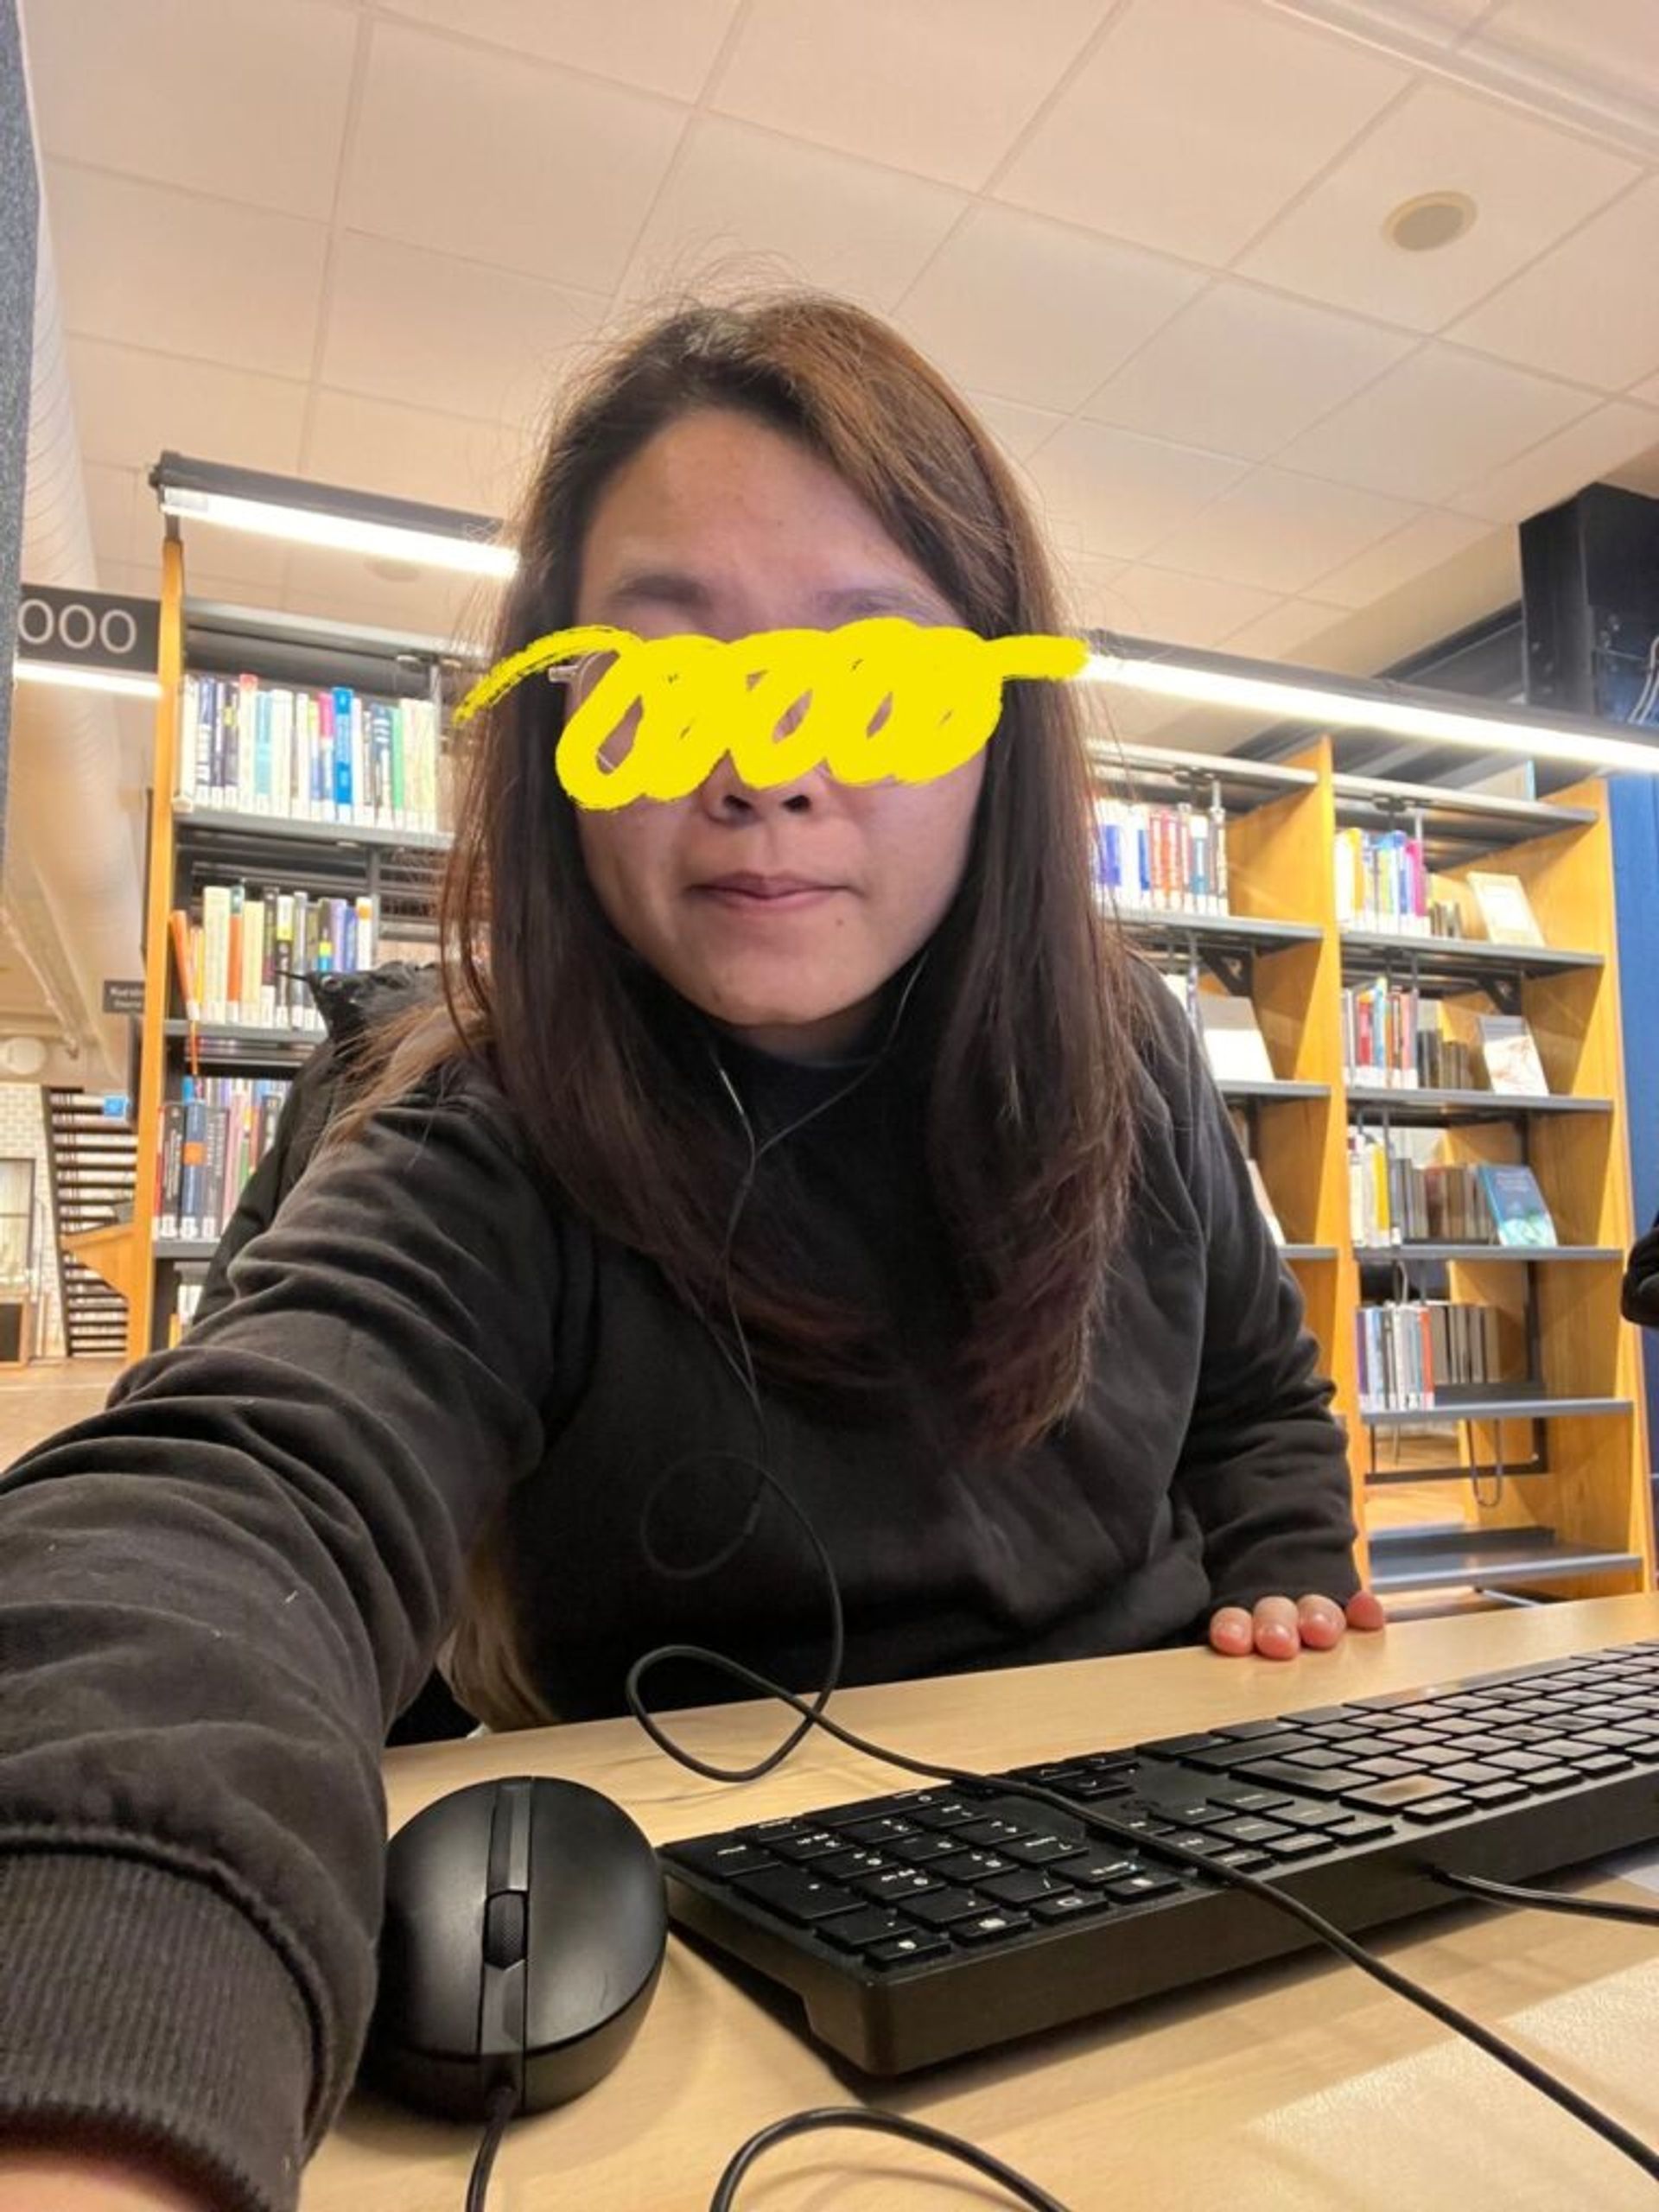 An international student from Vietnam in a university library.